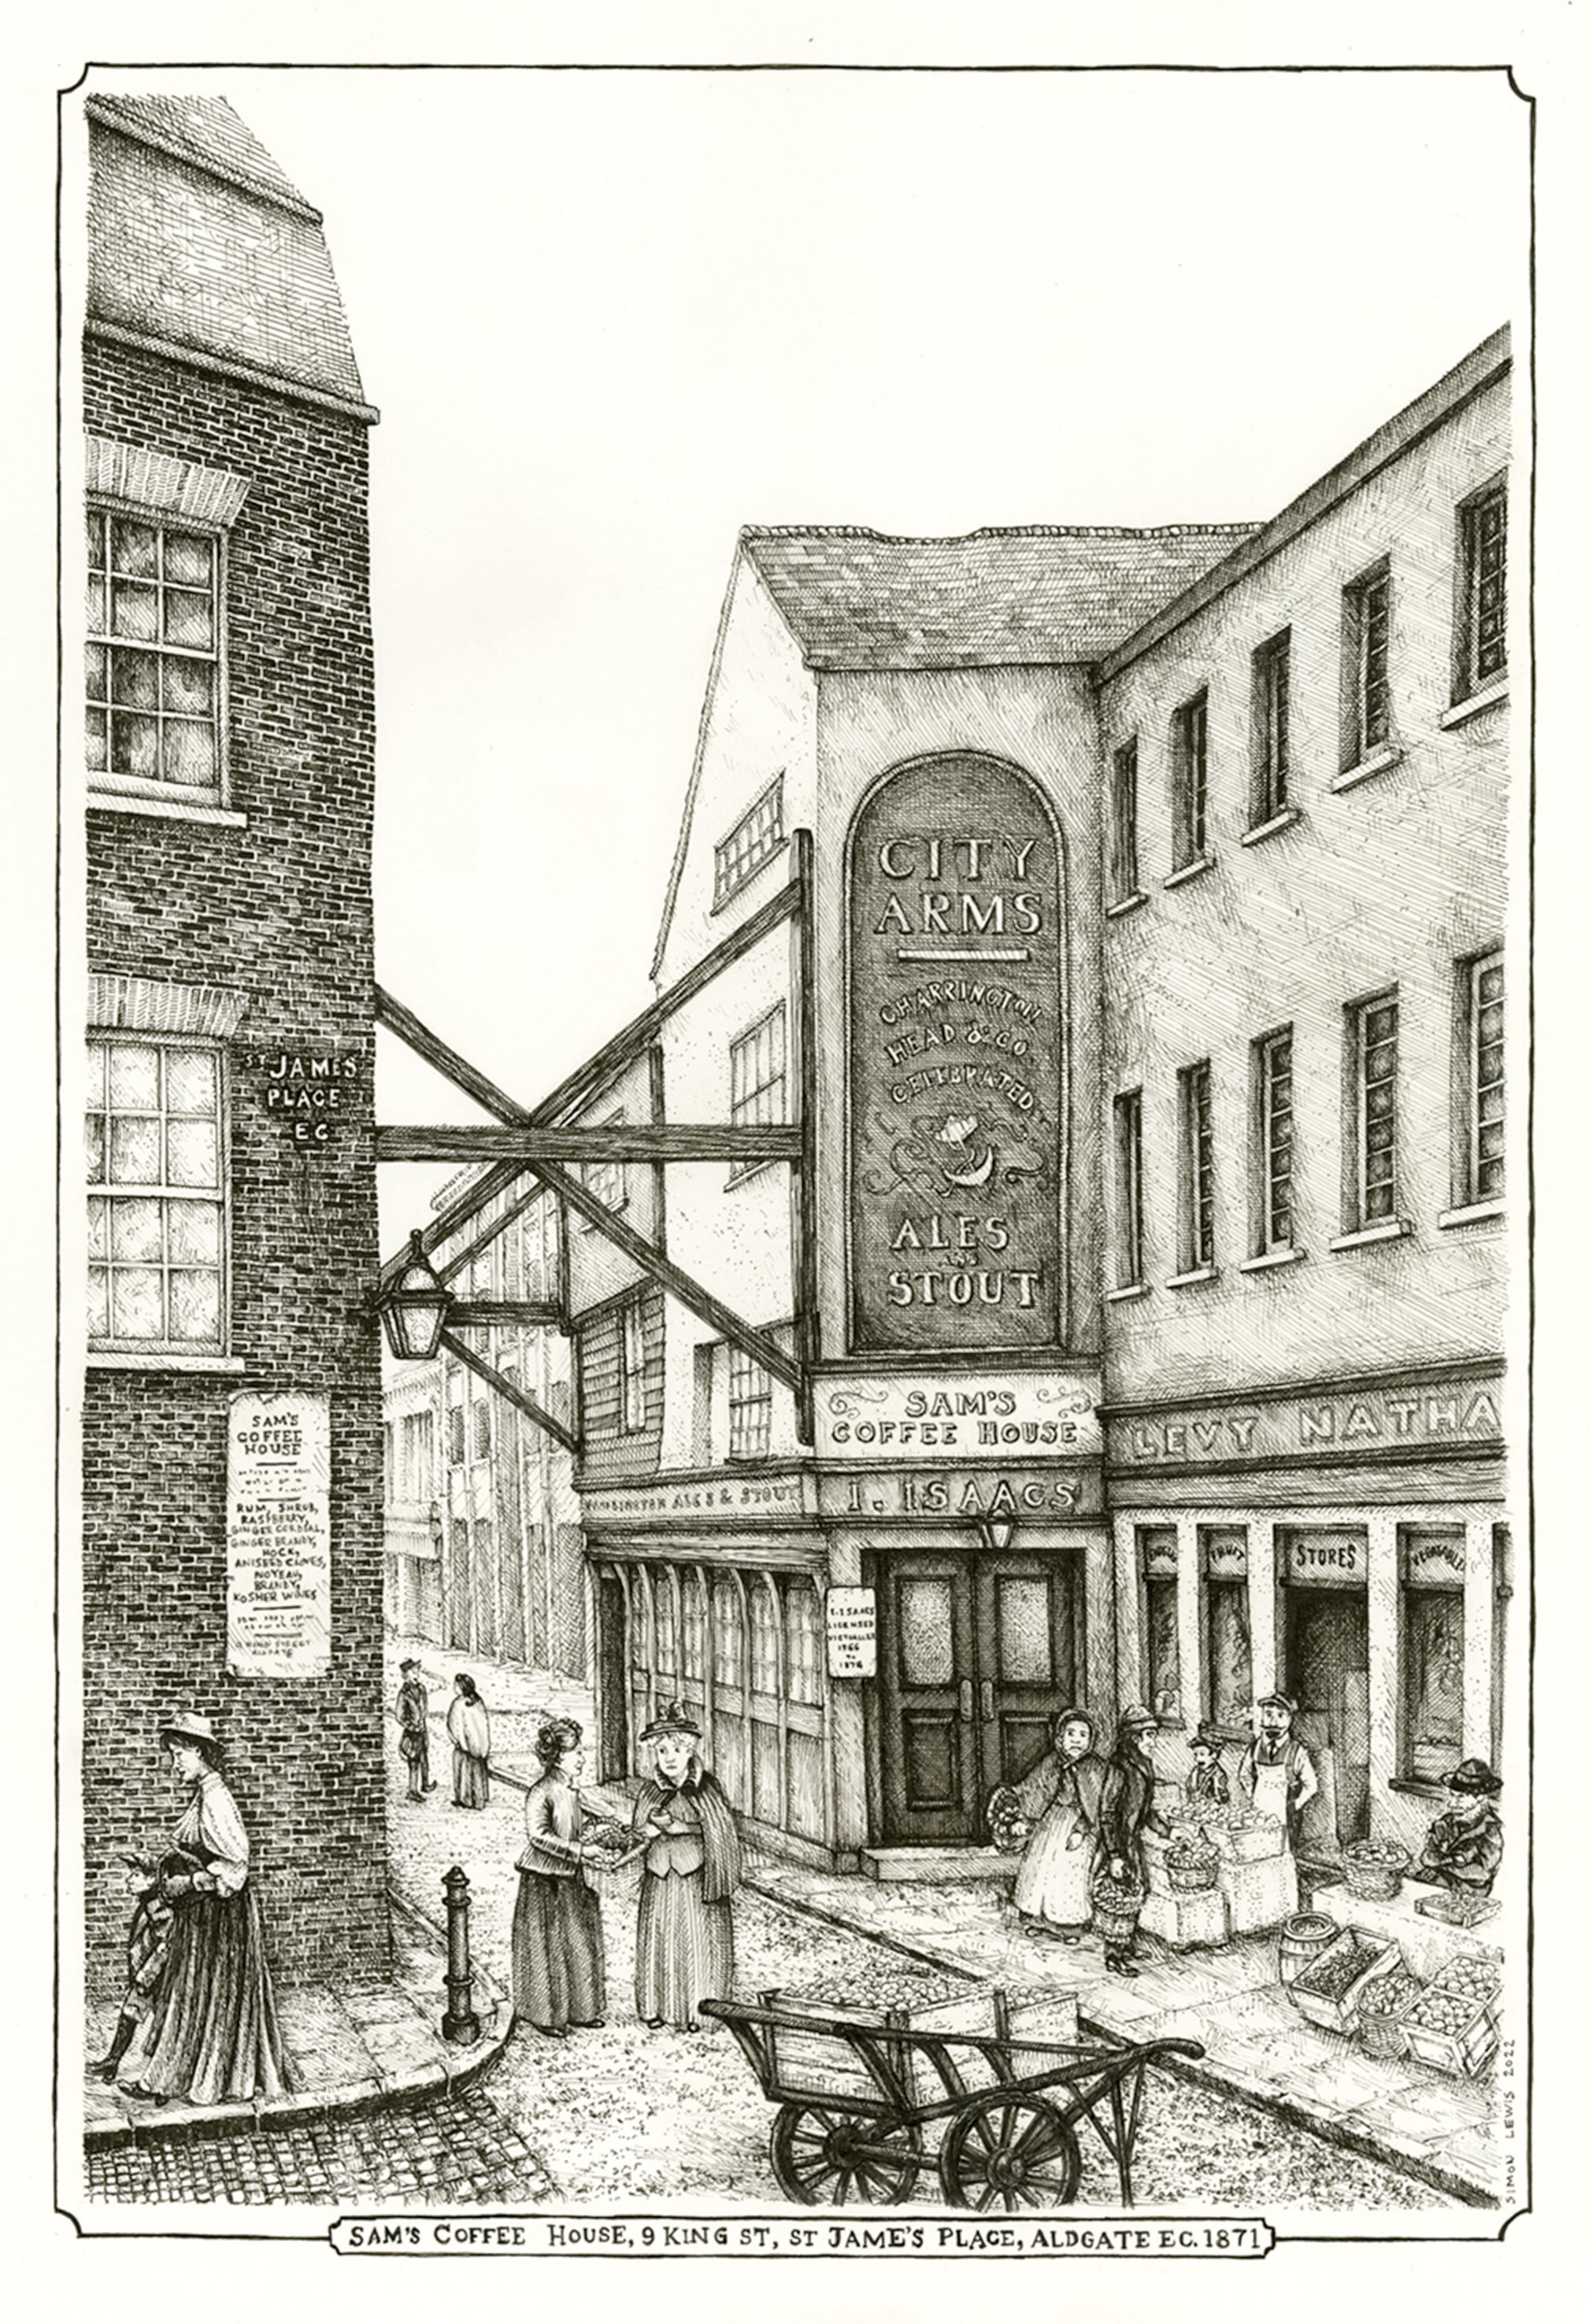 Sams Coffee House and the City Arms, King Street, Dukes Place ilustration by Simon Lewis